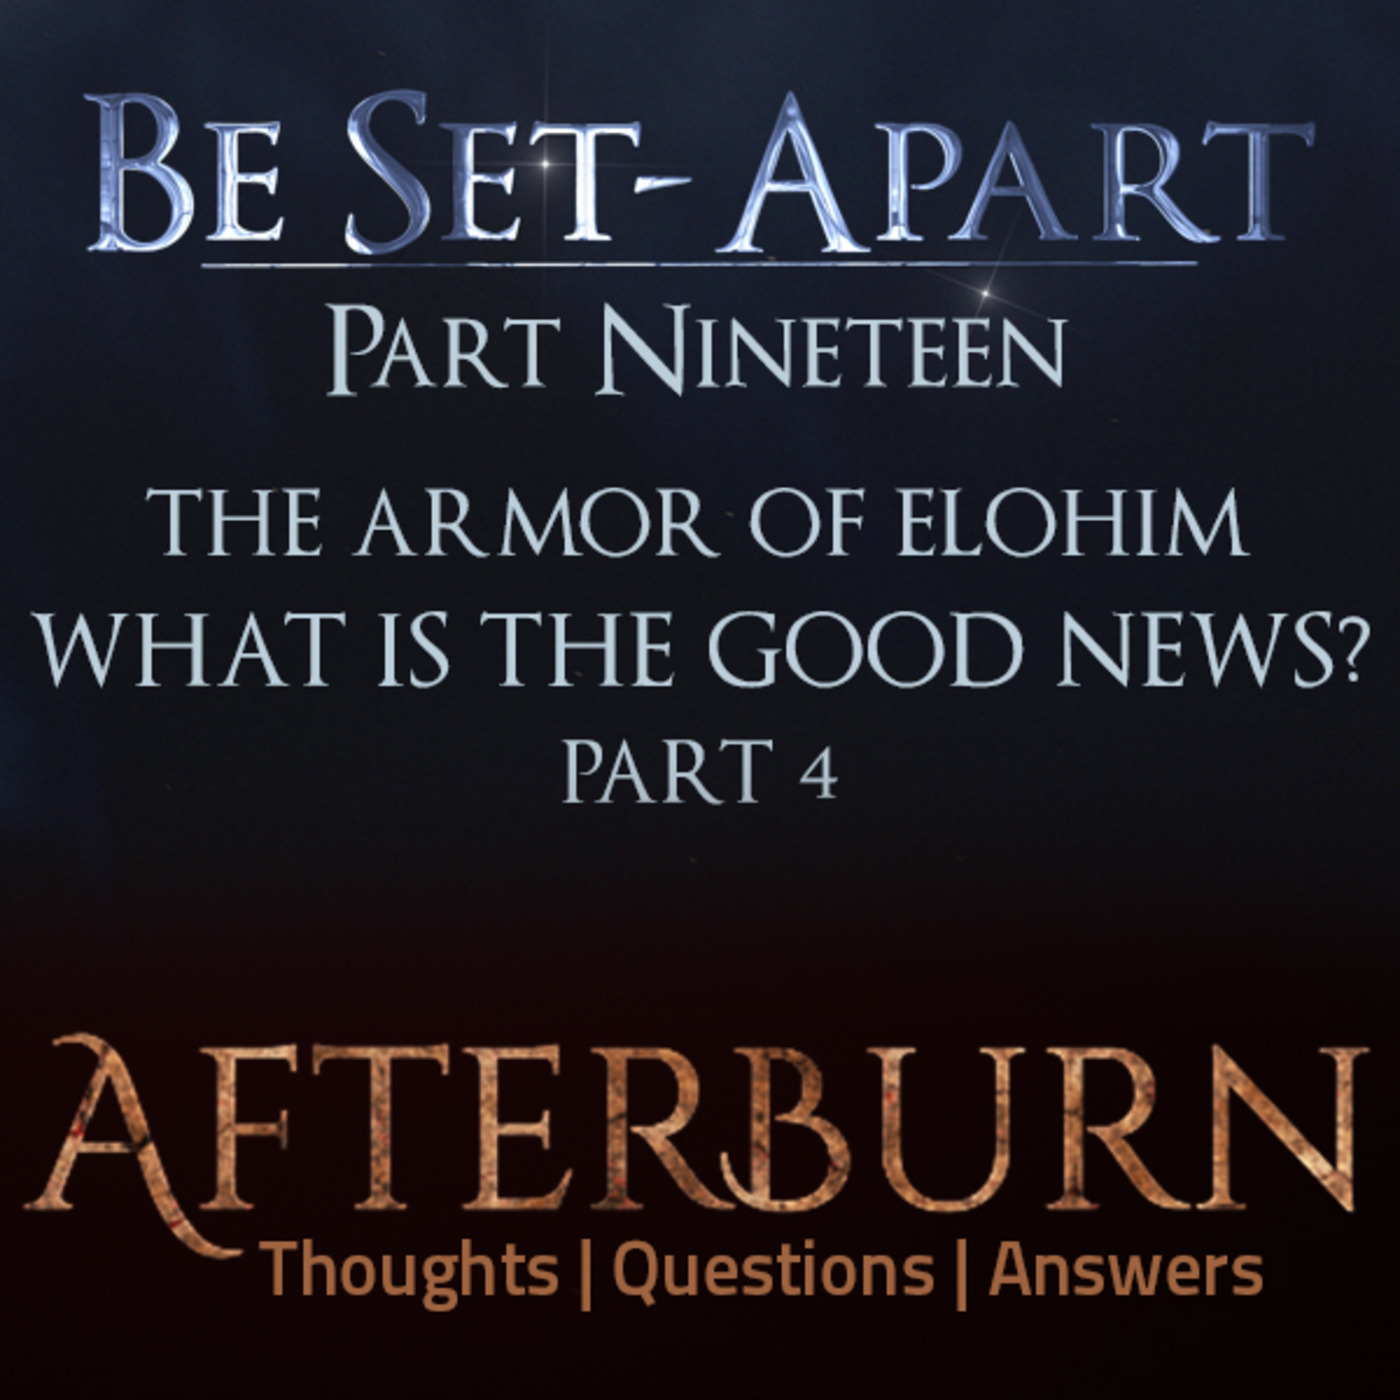 Episode 806: Afterburn | Be Set-Apart | Part Nineteen | The Armor of Elohim | What is the Good News? Part 4